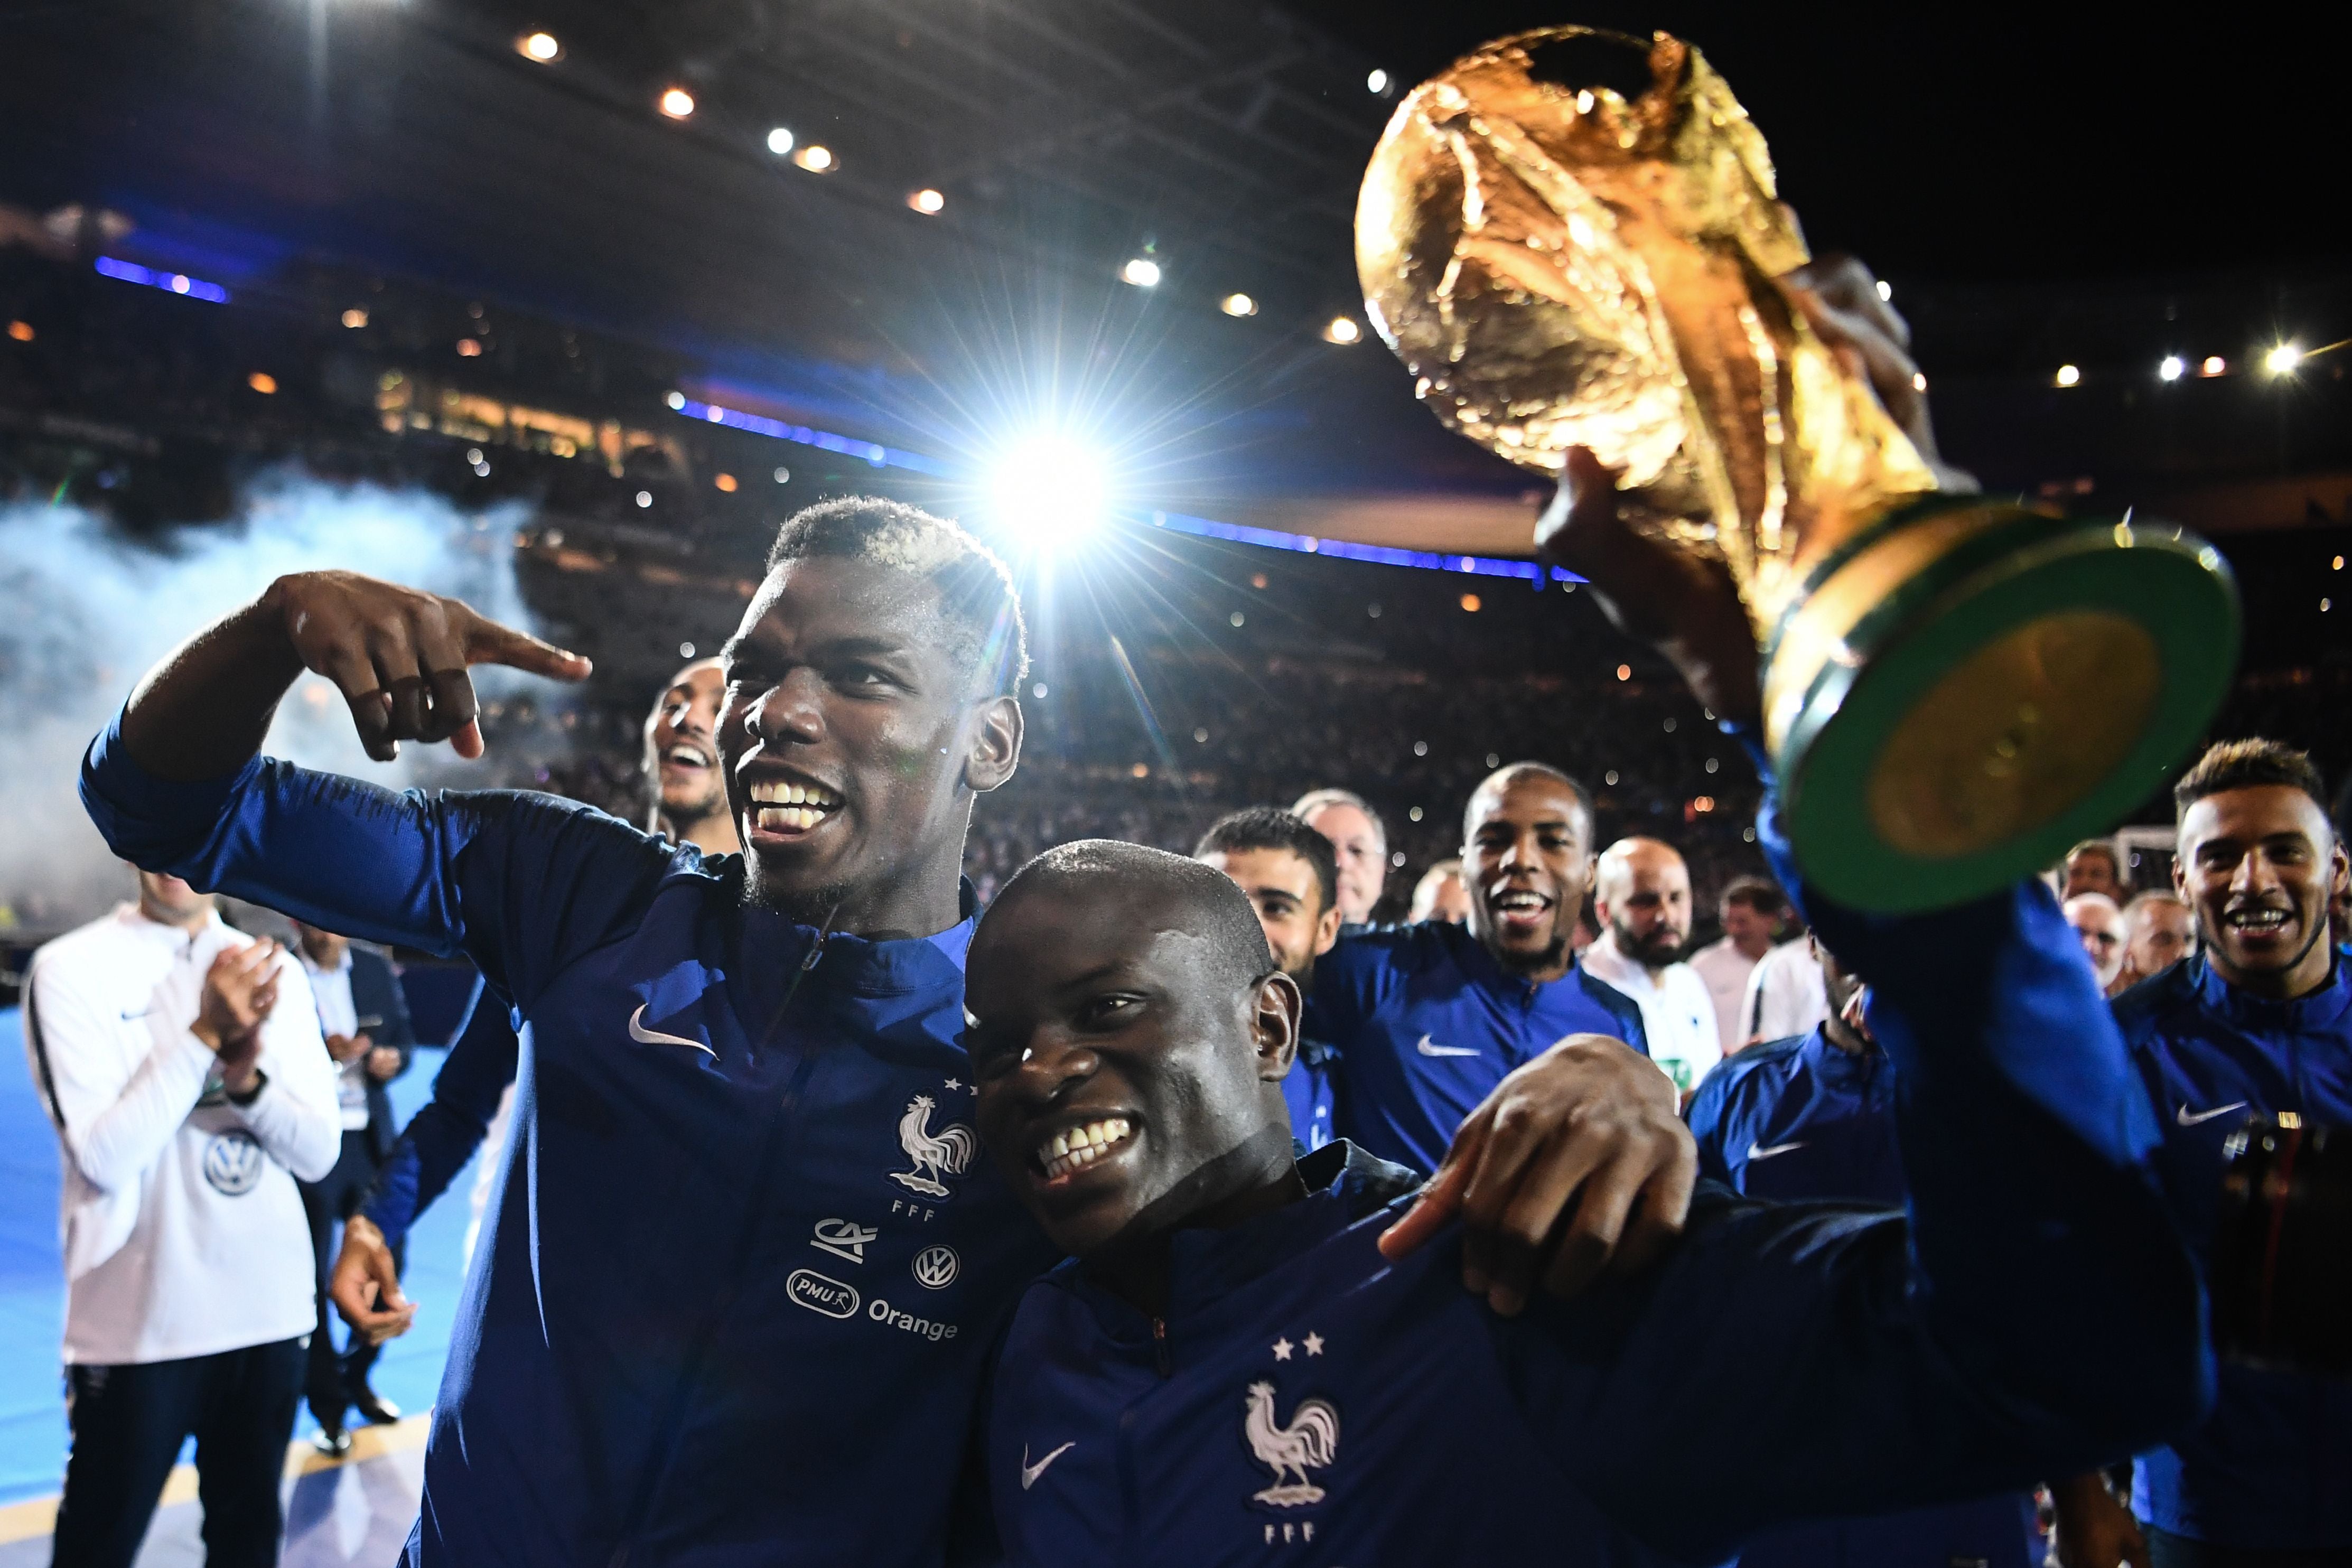 Paul Pogba and N’Golo Kante were World Cup winners in 2018